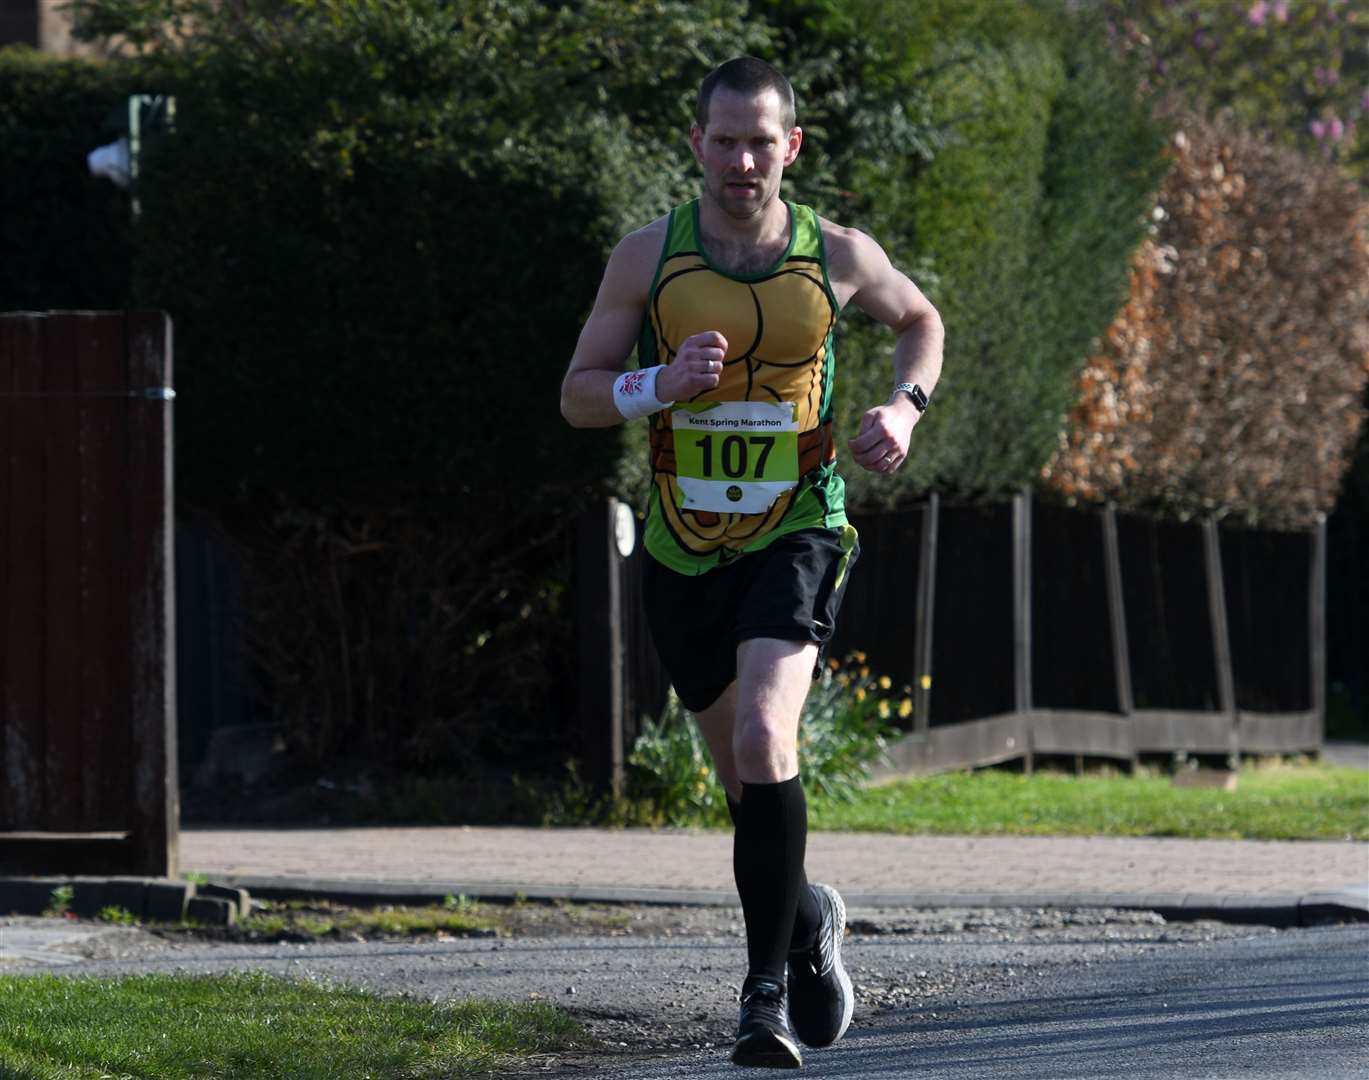 Lee Rogers stormed to victory in the marathon in a rather eye-catching outfit. Picture: Barry Goodwin